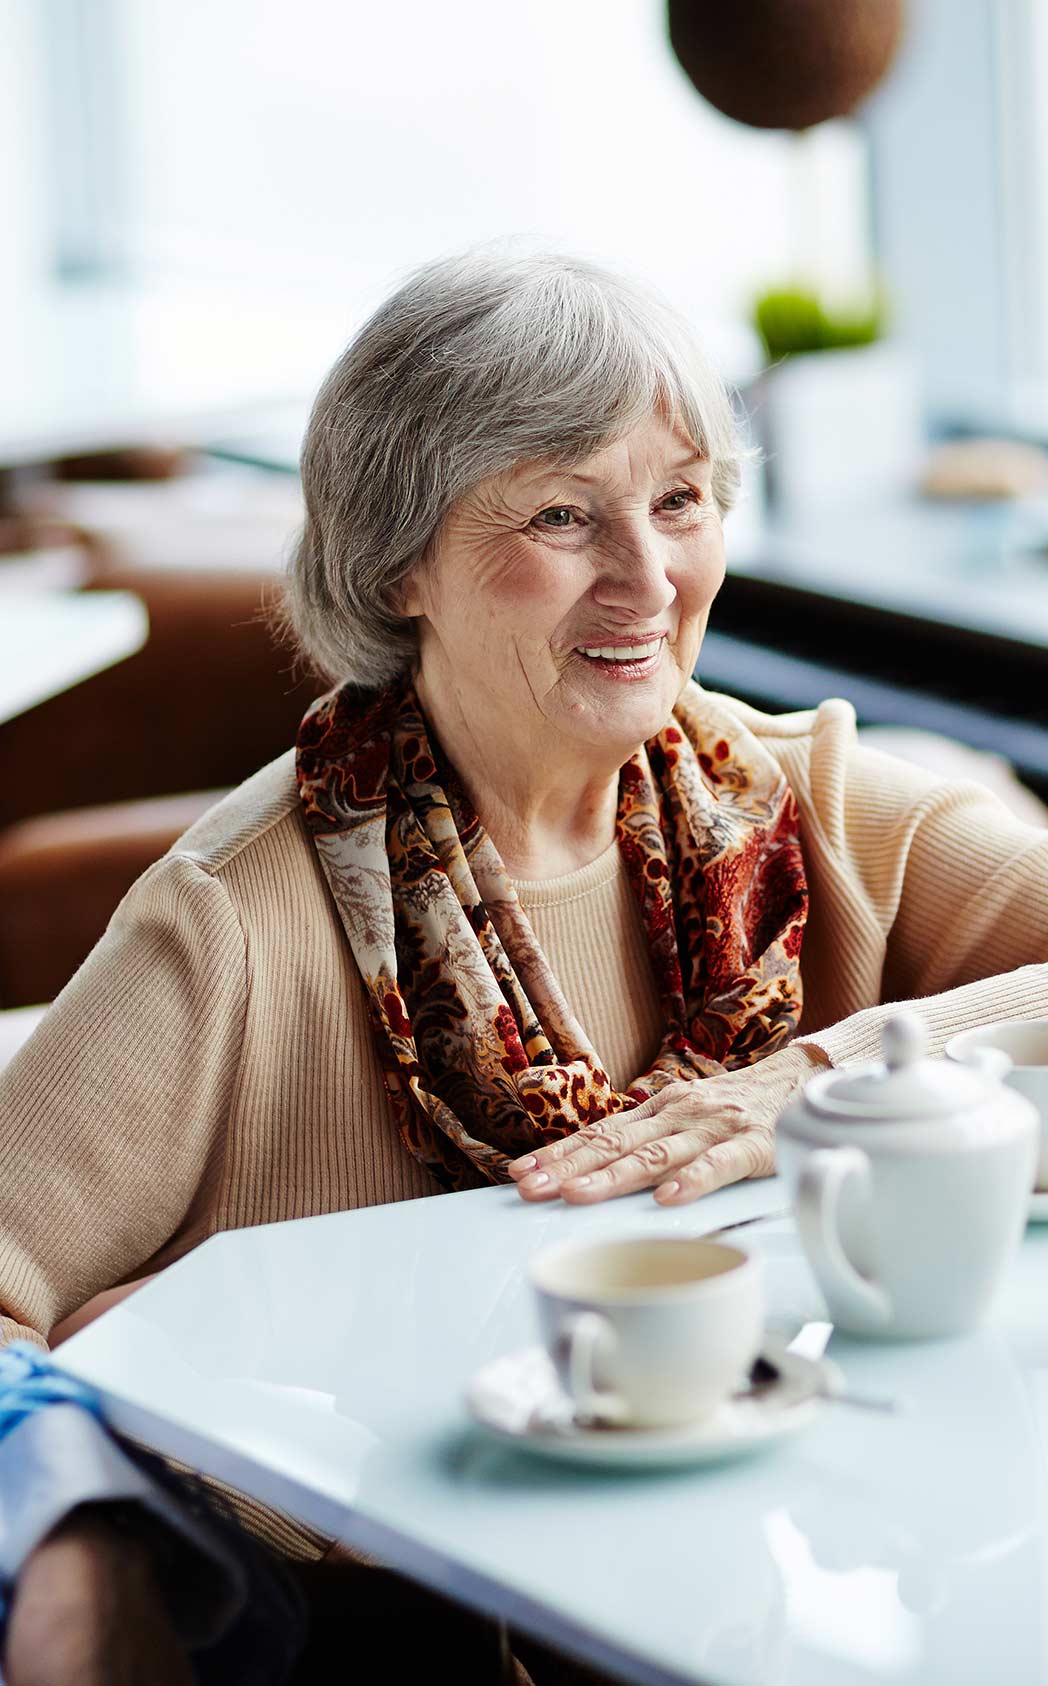 A senior lady smiles while sitting and speaking with someone over coffee.